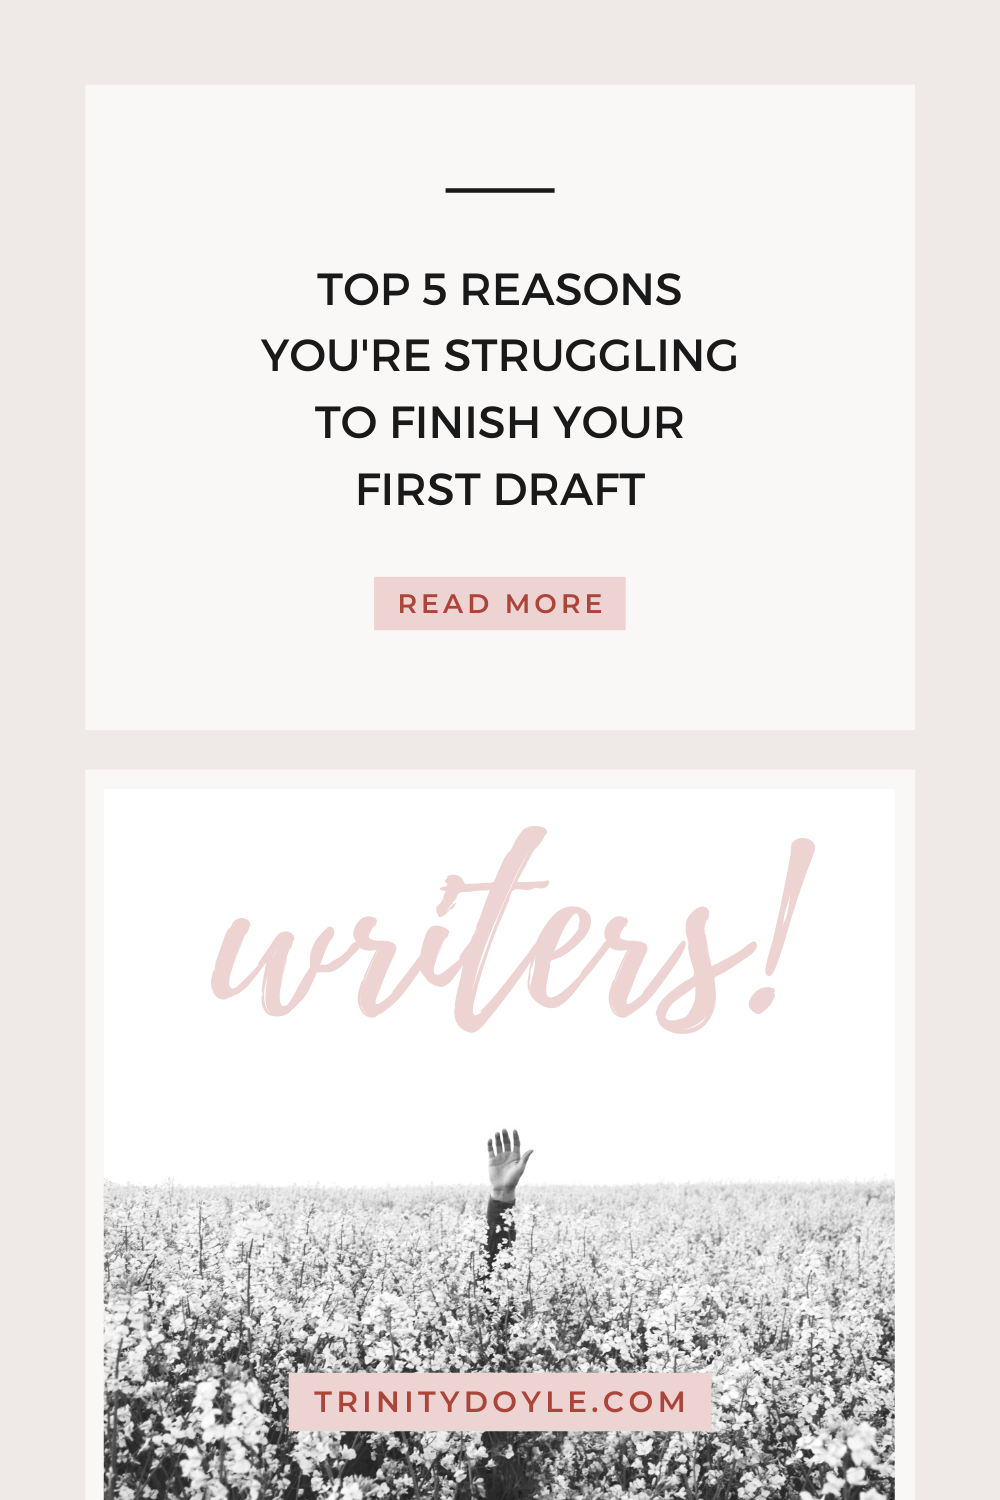 TOP 5 REASONS YOU'RE STRUGGLING TO FINISH YOUR FIRST DRAFT